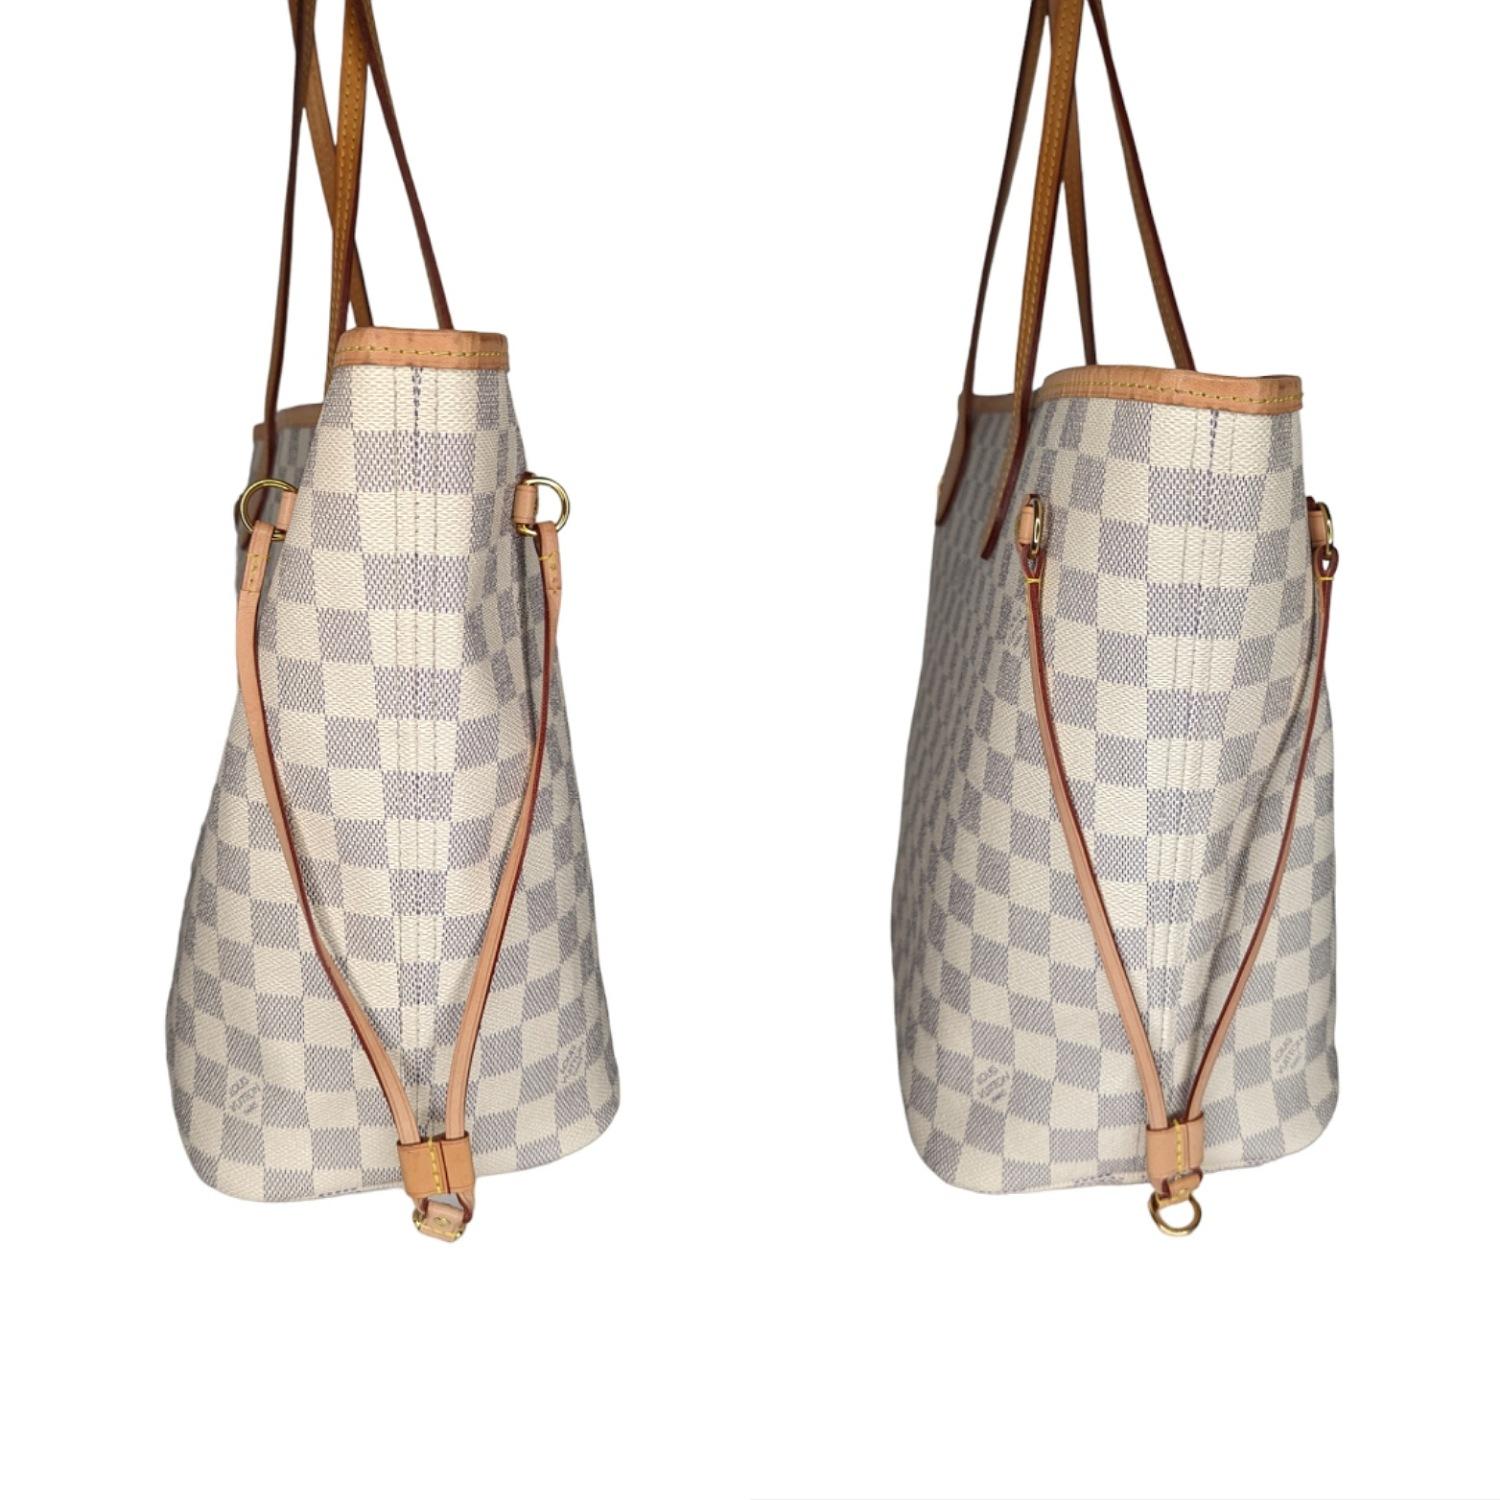 Louis Vuitton Neverfull Damier Azur MM Tote Rose Ballerine In Excellent Condition For Sale In Scottsdale, AZ